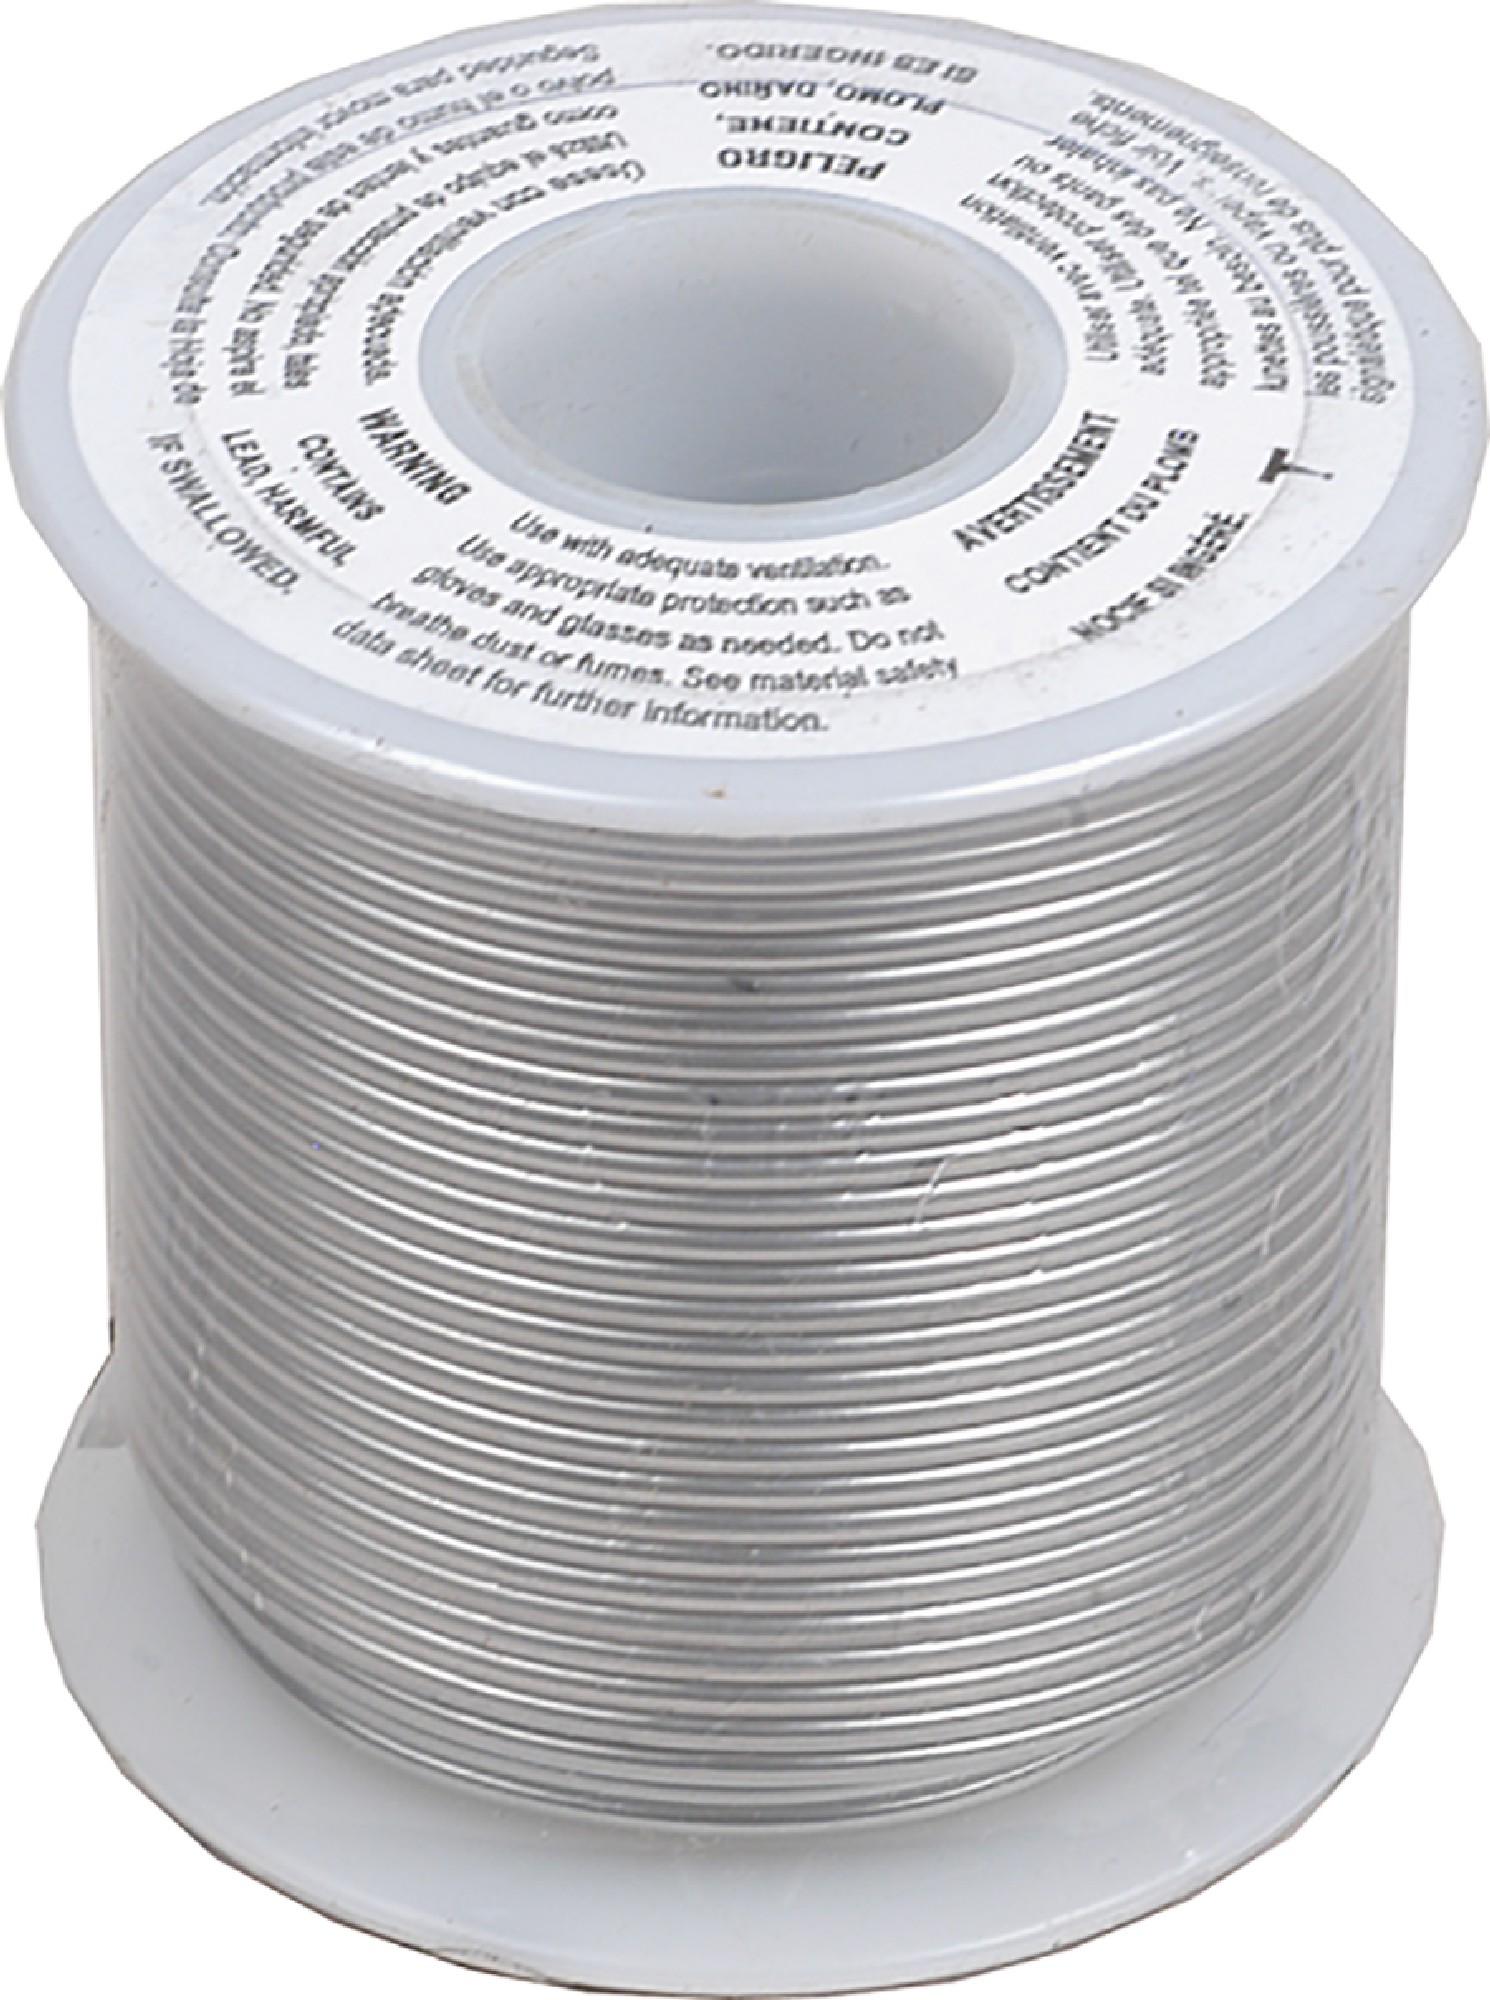 DB Electrical 900-20009 Solder, 40/60; 0.062 Wire Diameter; 1lb Spool for Universal 900-20009